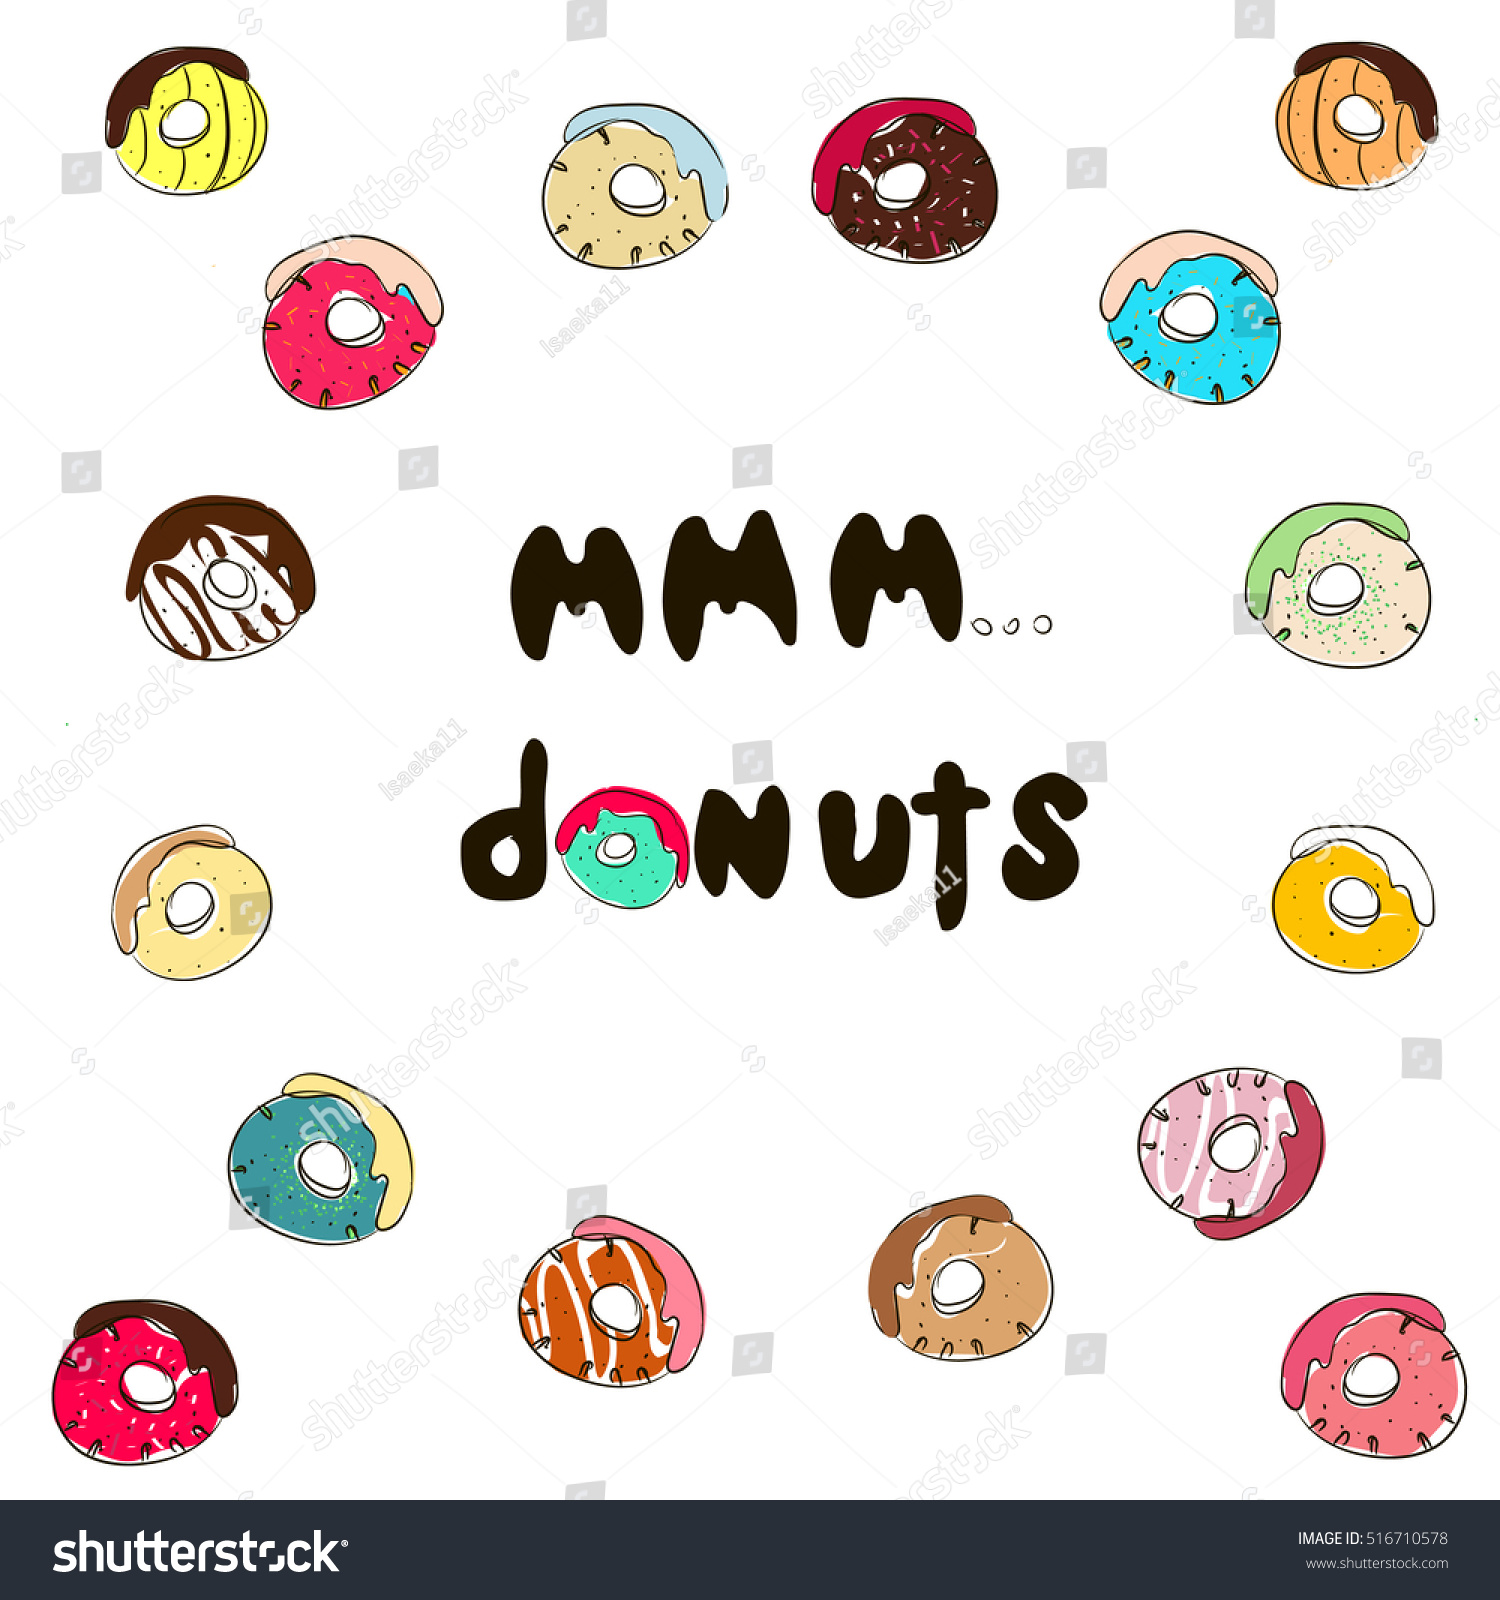 Mmm Donuts Inscription Stock Quotes Donuts Stock Vector Royalty Free 516710578 Shutterstock